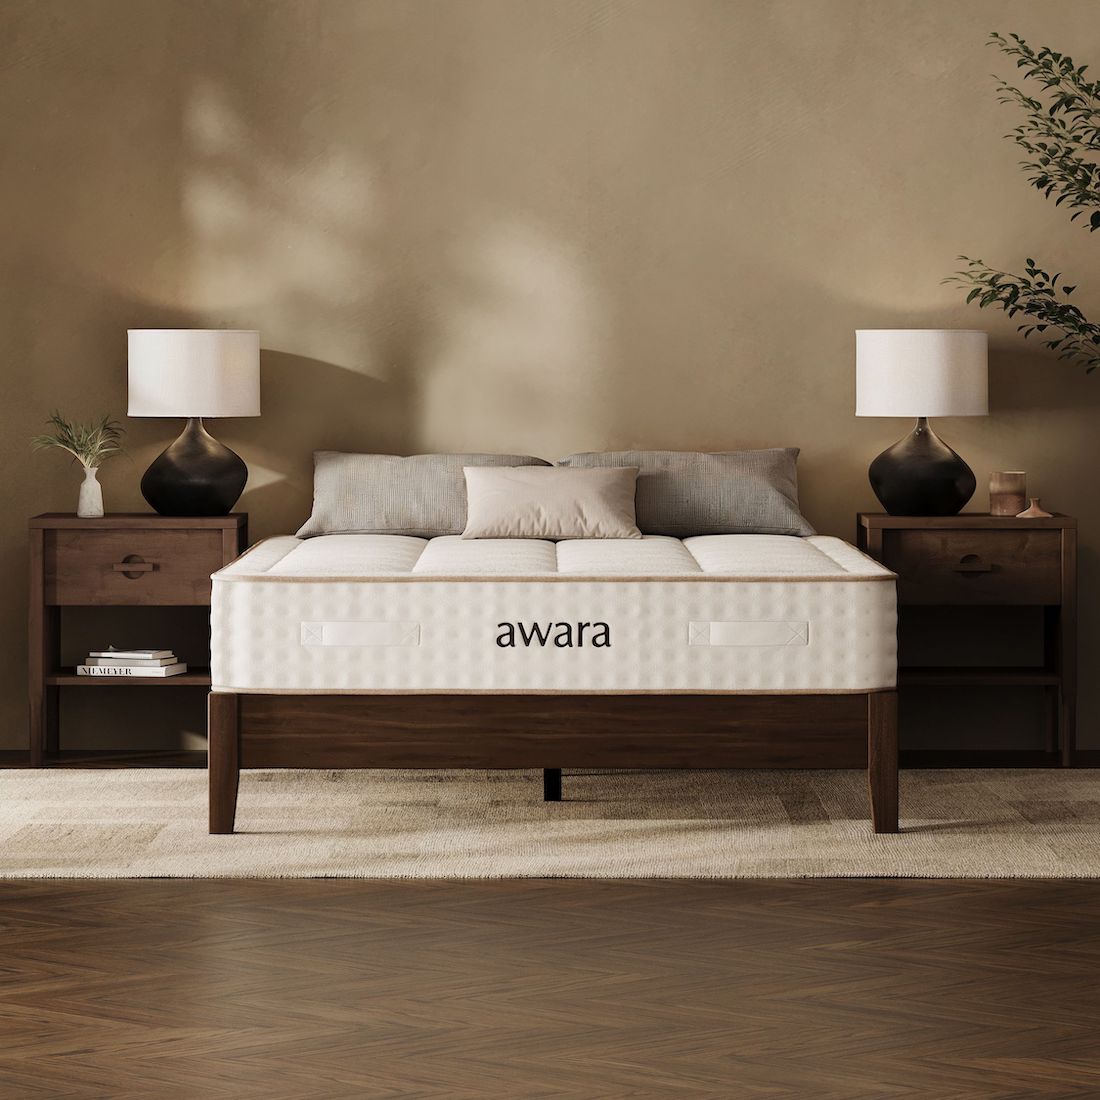 A neatly made bed with "awara" written on the organic mattress, flanked by two wooden nightstands with lamps and decorative items, in a warmly lit bedroom.